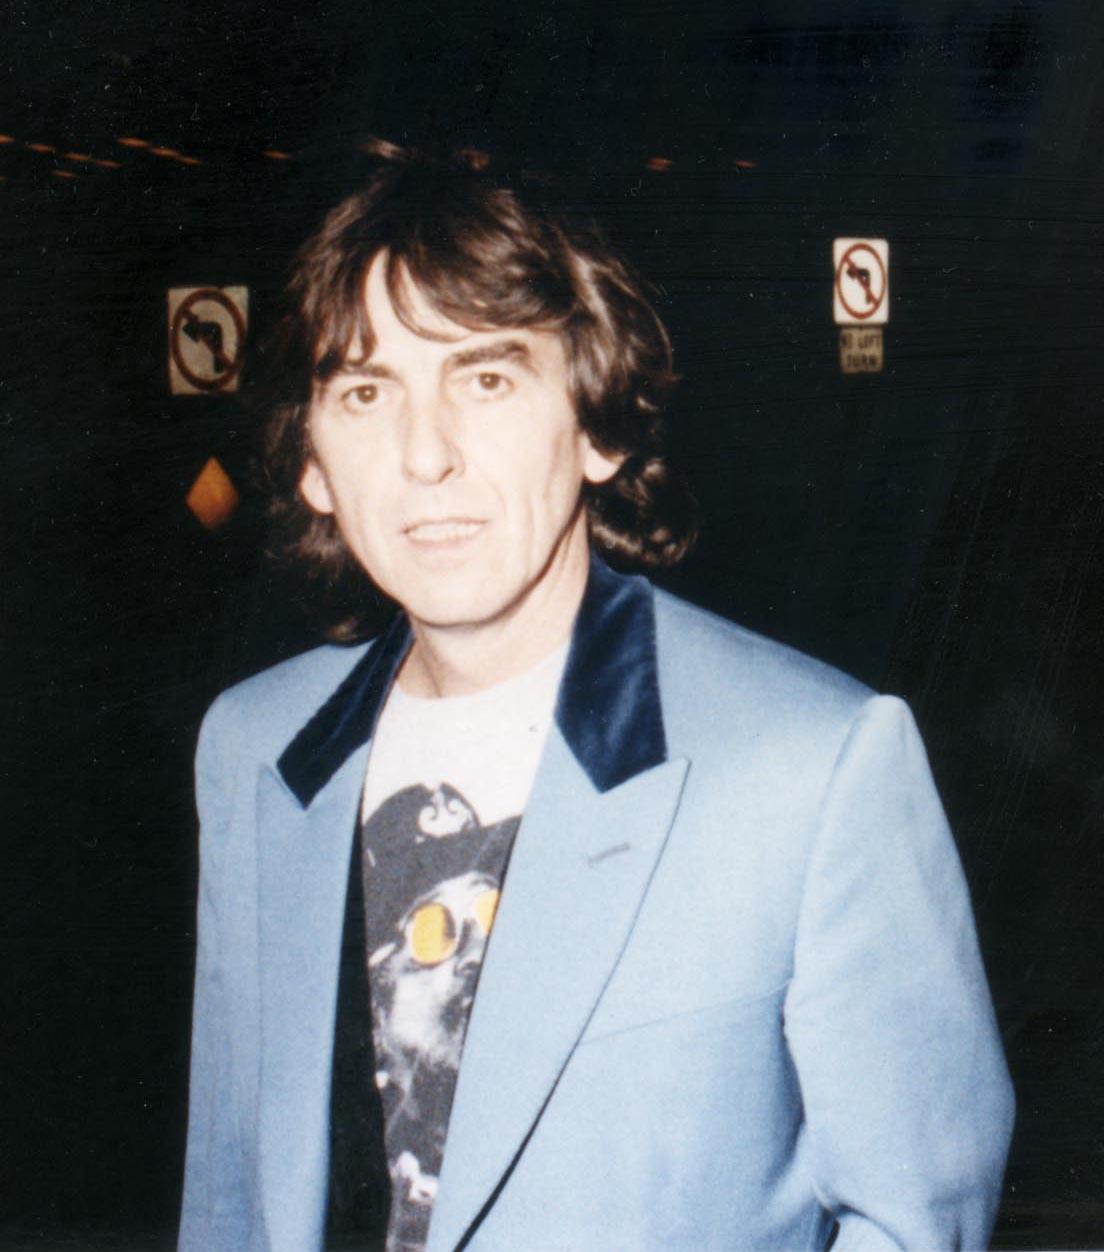 A throwback photo of George Harrison in a blue suit at an event.